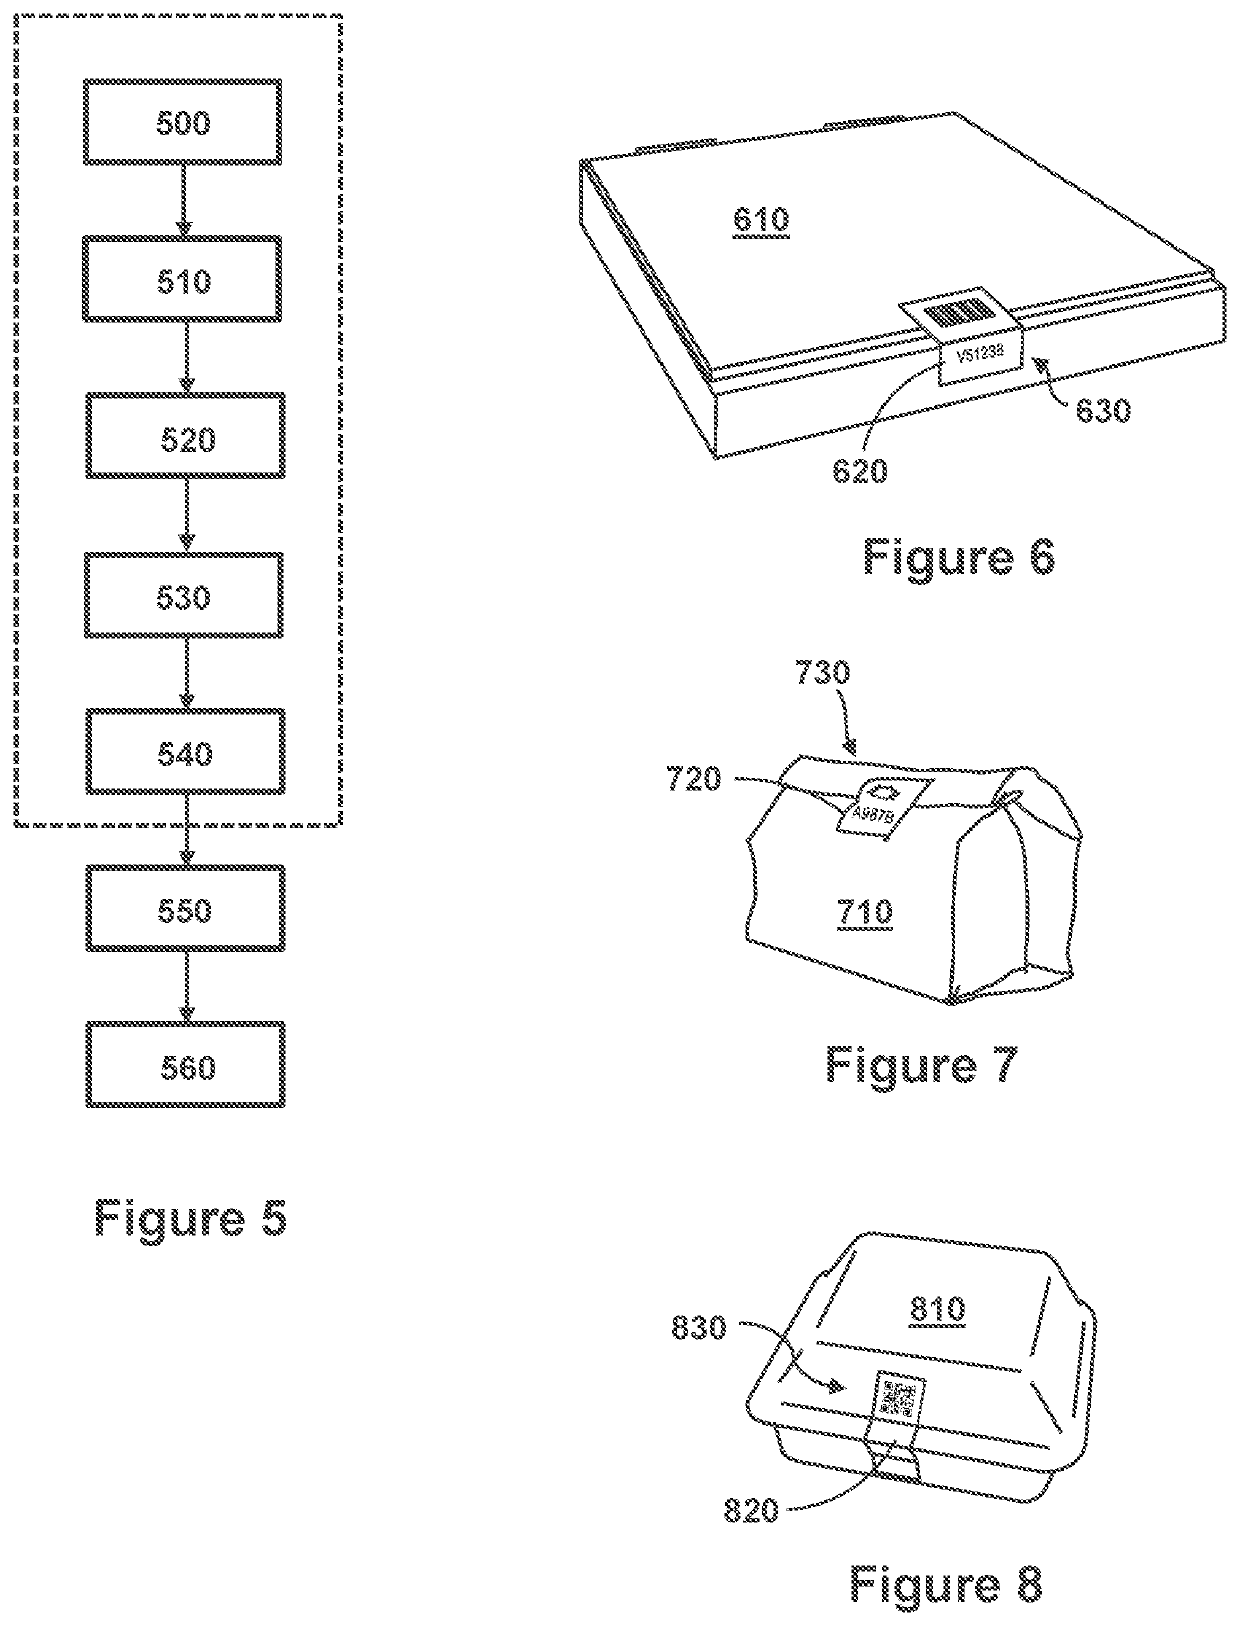 System, Method, And Packaging For Secure Food Delivery